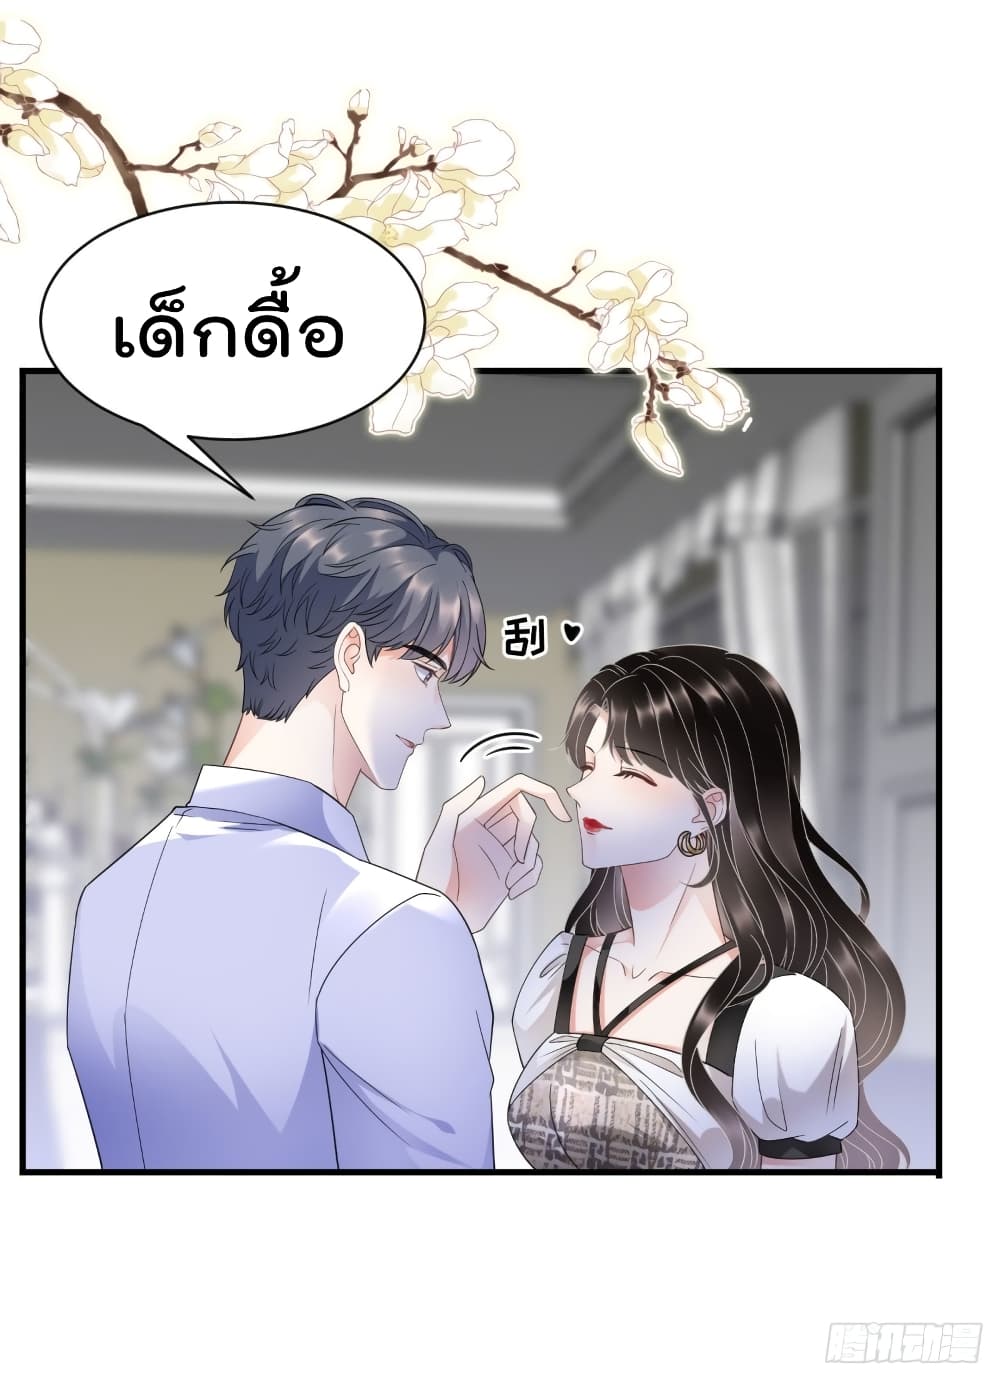 What Can the Eldest Lady Have คุณหนูใหญ่ ทำไมคุณร้ายอย่างนี้ 29-29